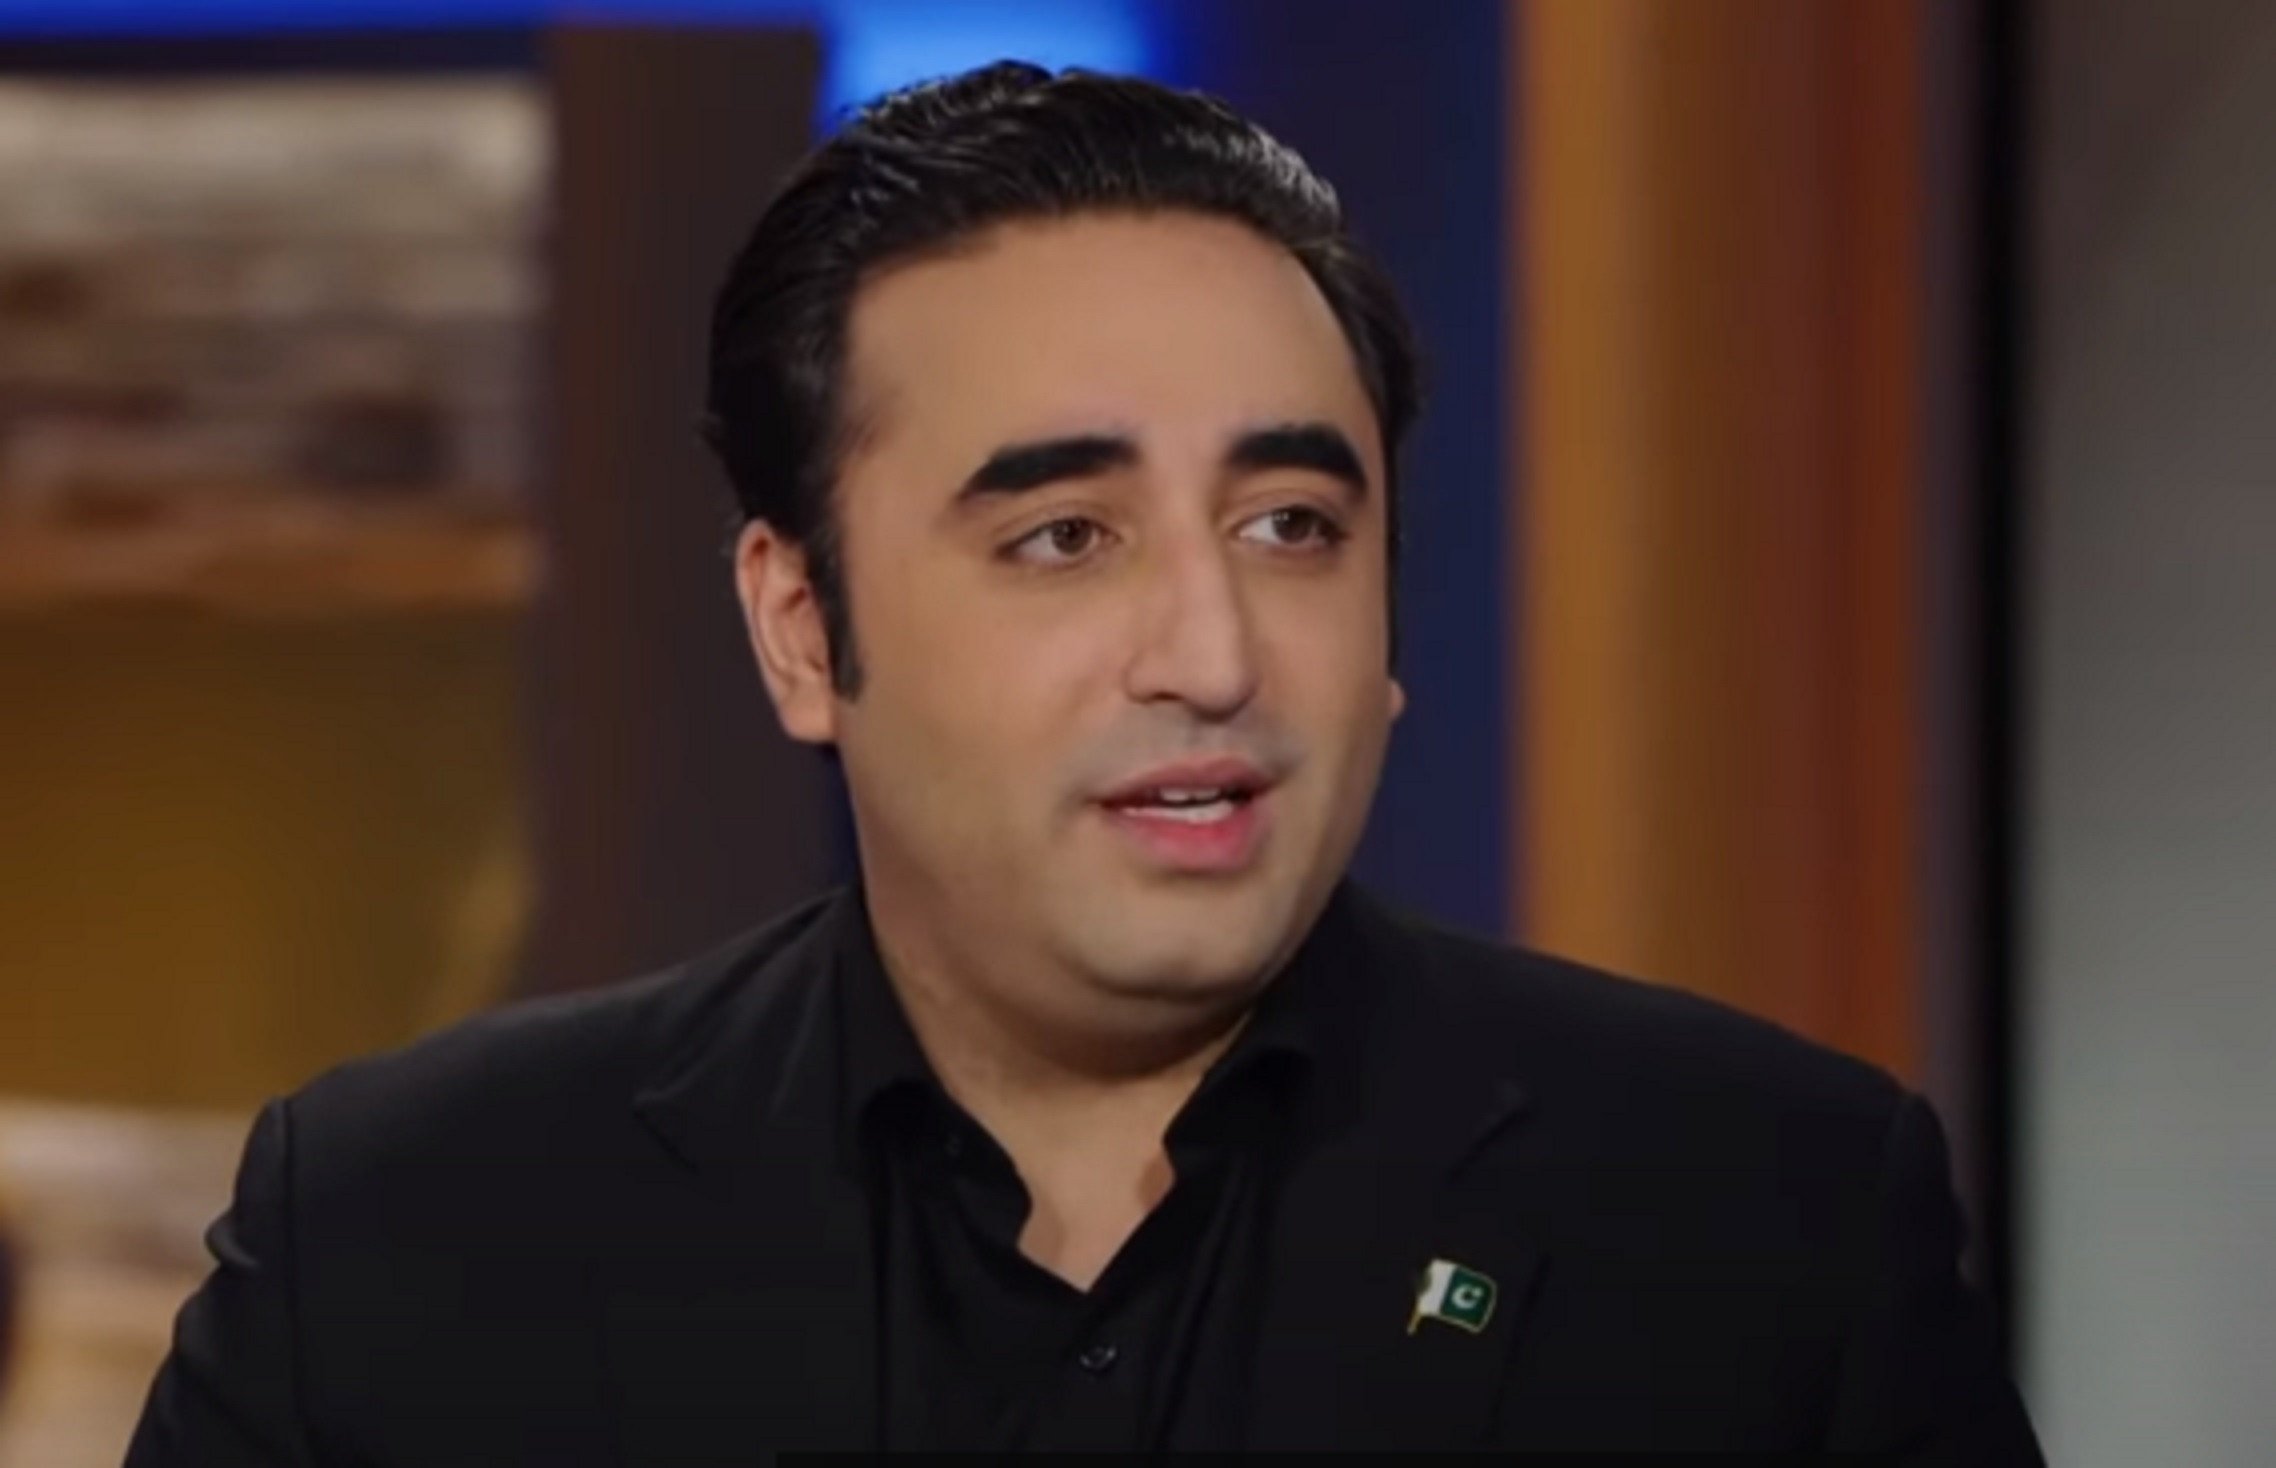 foreign minister of pakistan bilawal bhutto zardari s interview on the daily show with kal penn photo screengrab